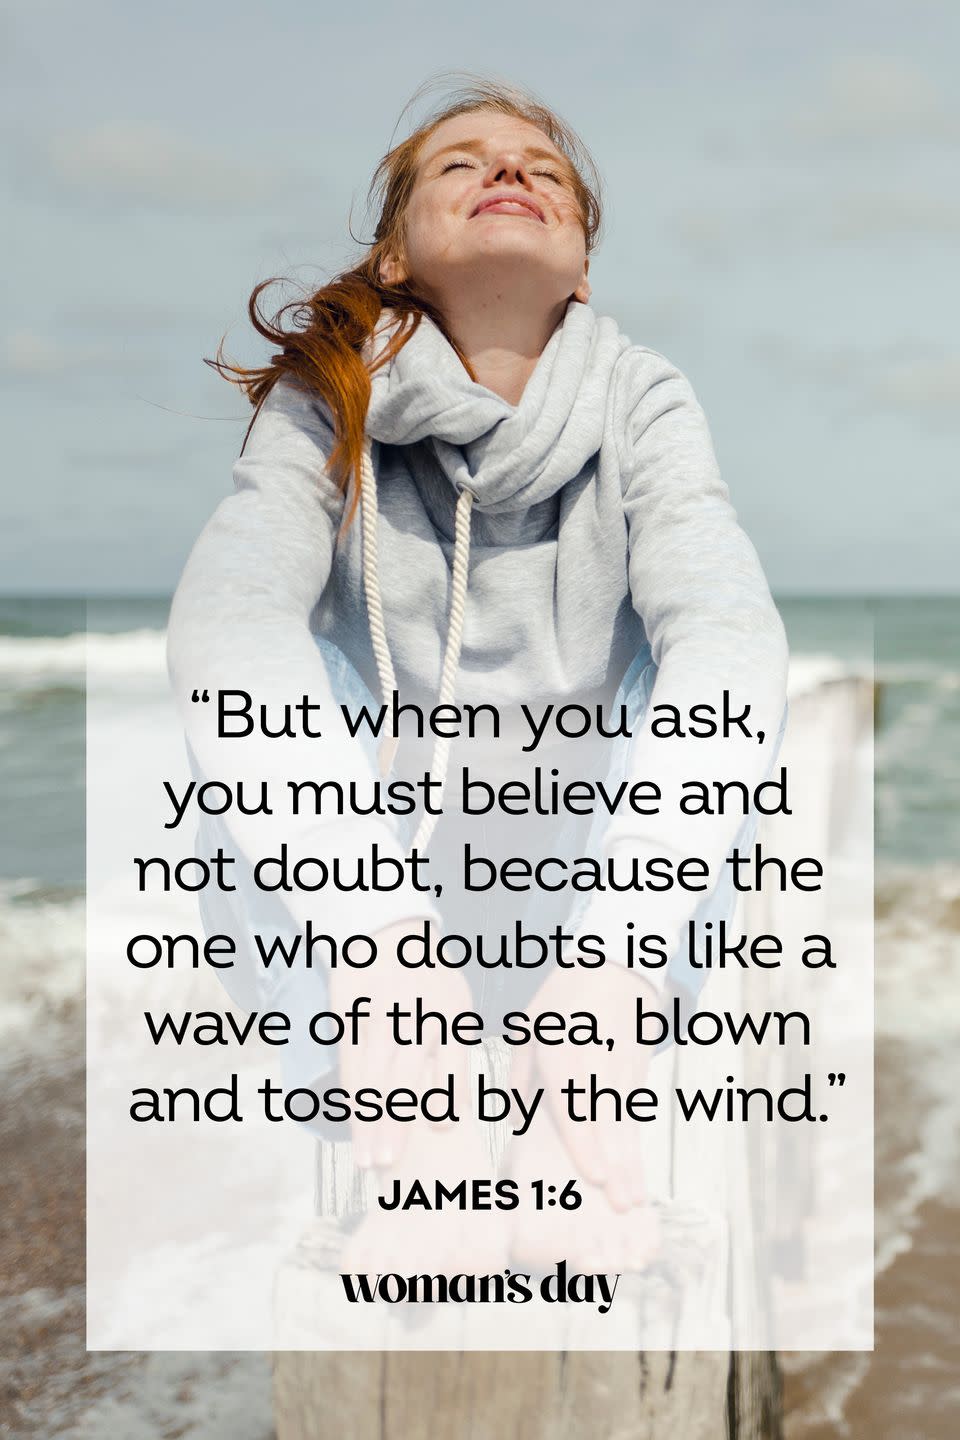 <p>"But when you ask, you must believe and not doubt, because the one who doubts is like a wave of the sea, blown and tossed by the wind."<br><br><strong>The Good News: </strong>Your faith in the Lord allows you to stand strong in the face of adversity. <br></p>